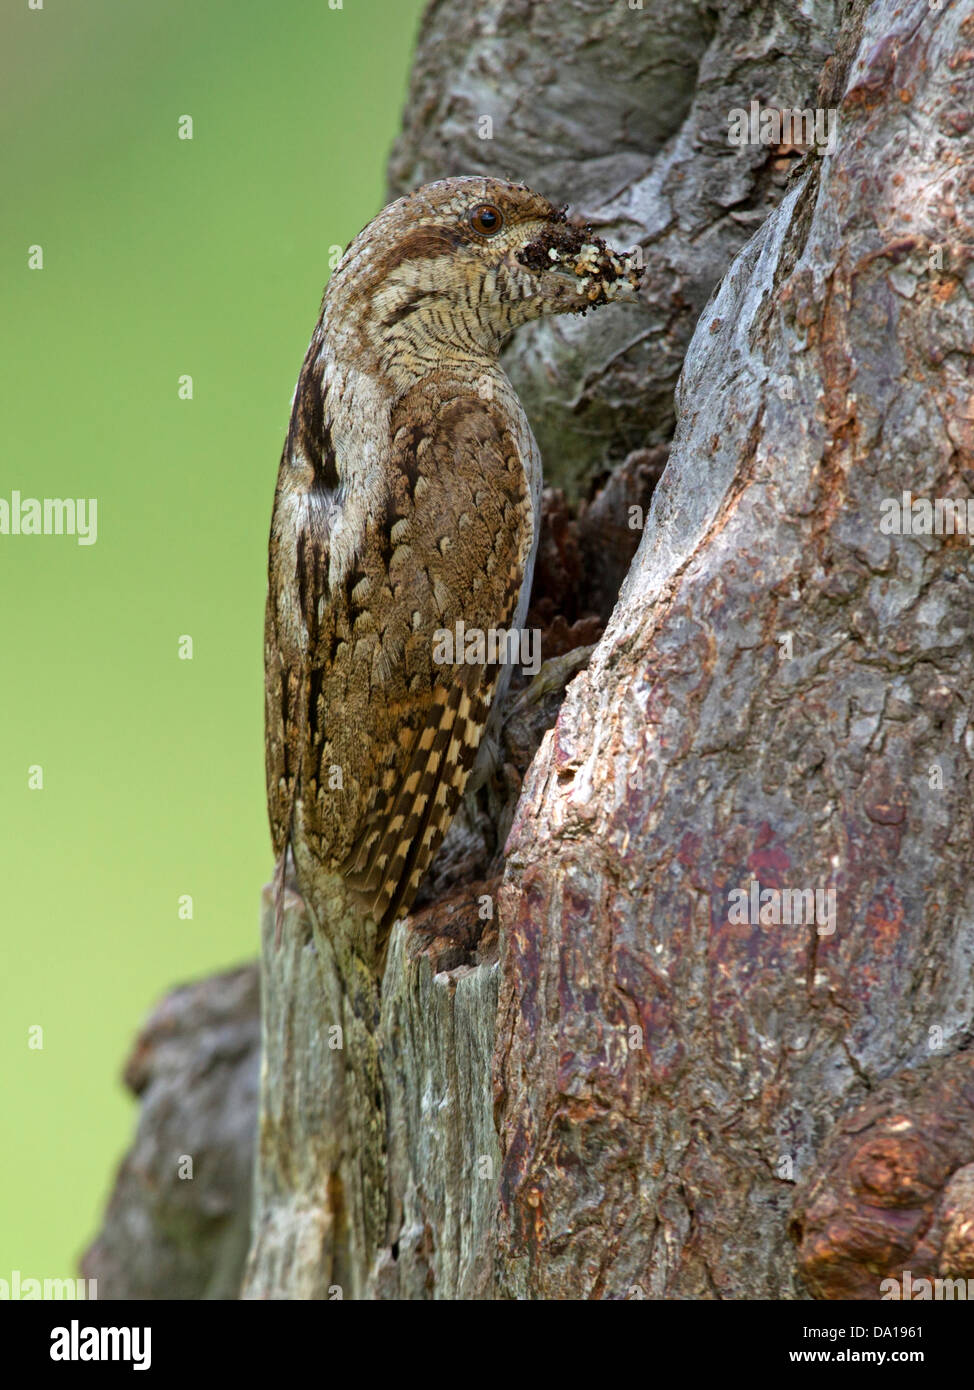 Eurasian wryneck at nest hole with insects in beak Stock Photo